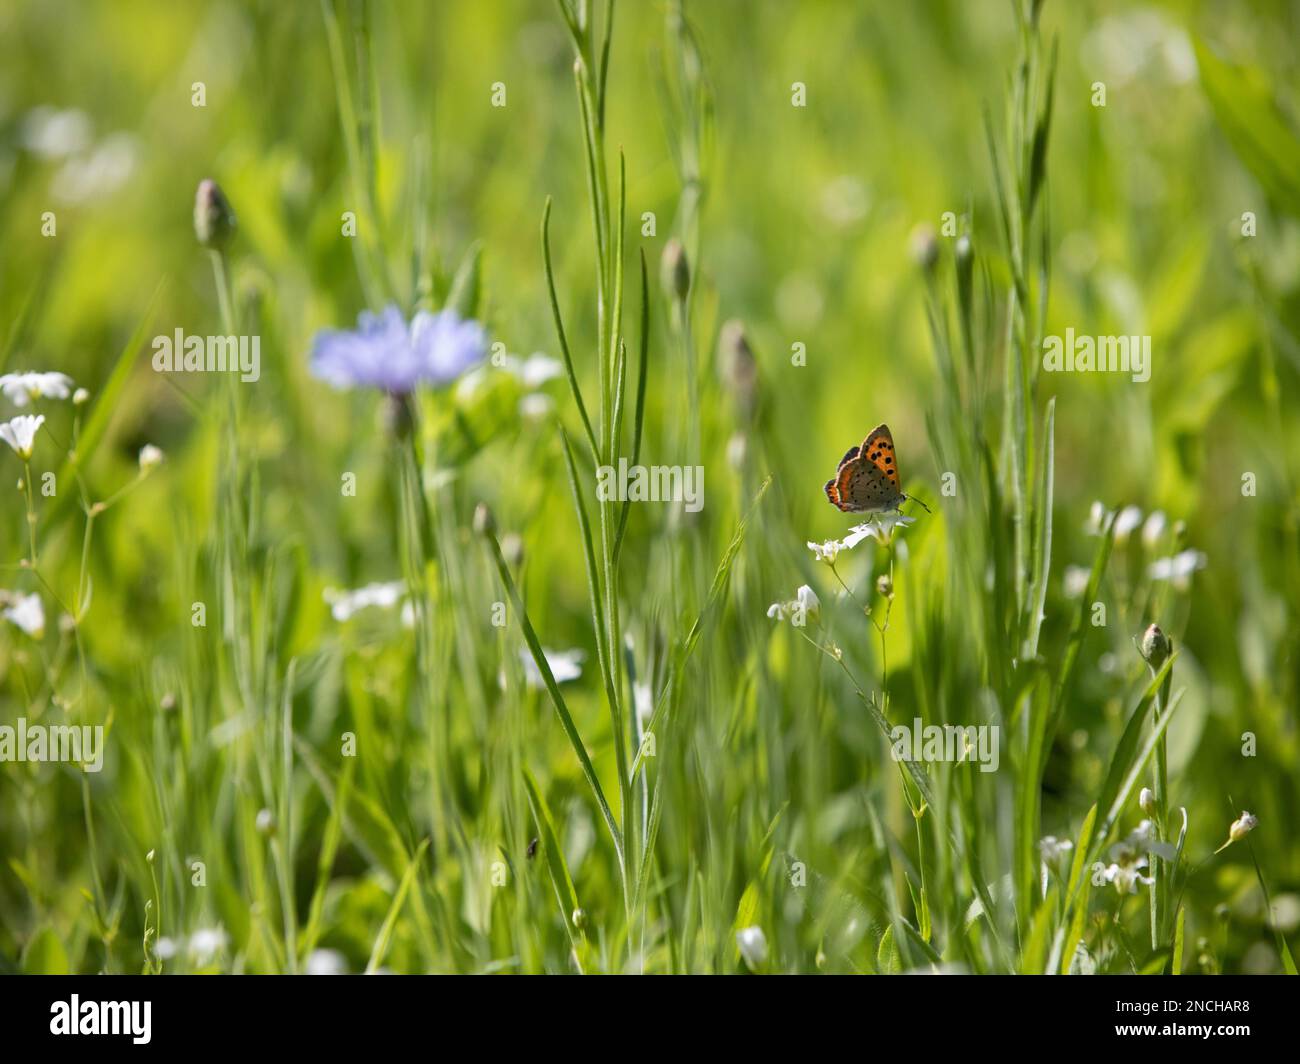 A field of wildflowers with a butterfly. Stock Photo